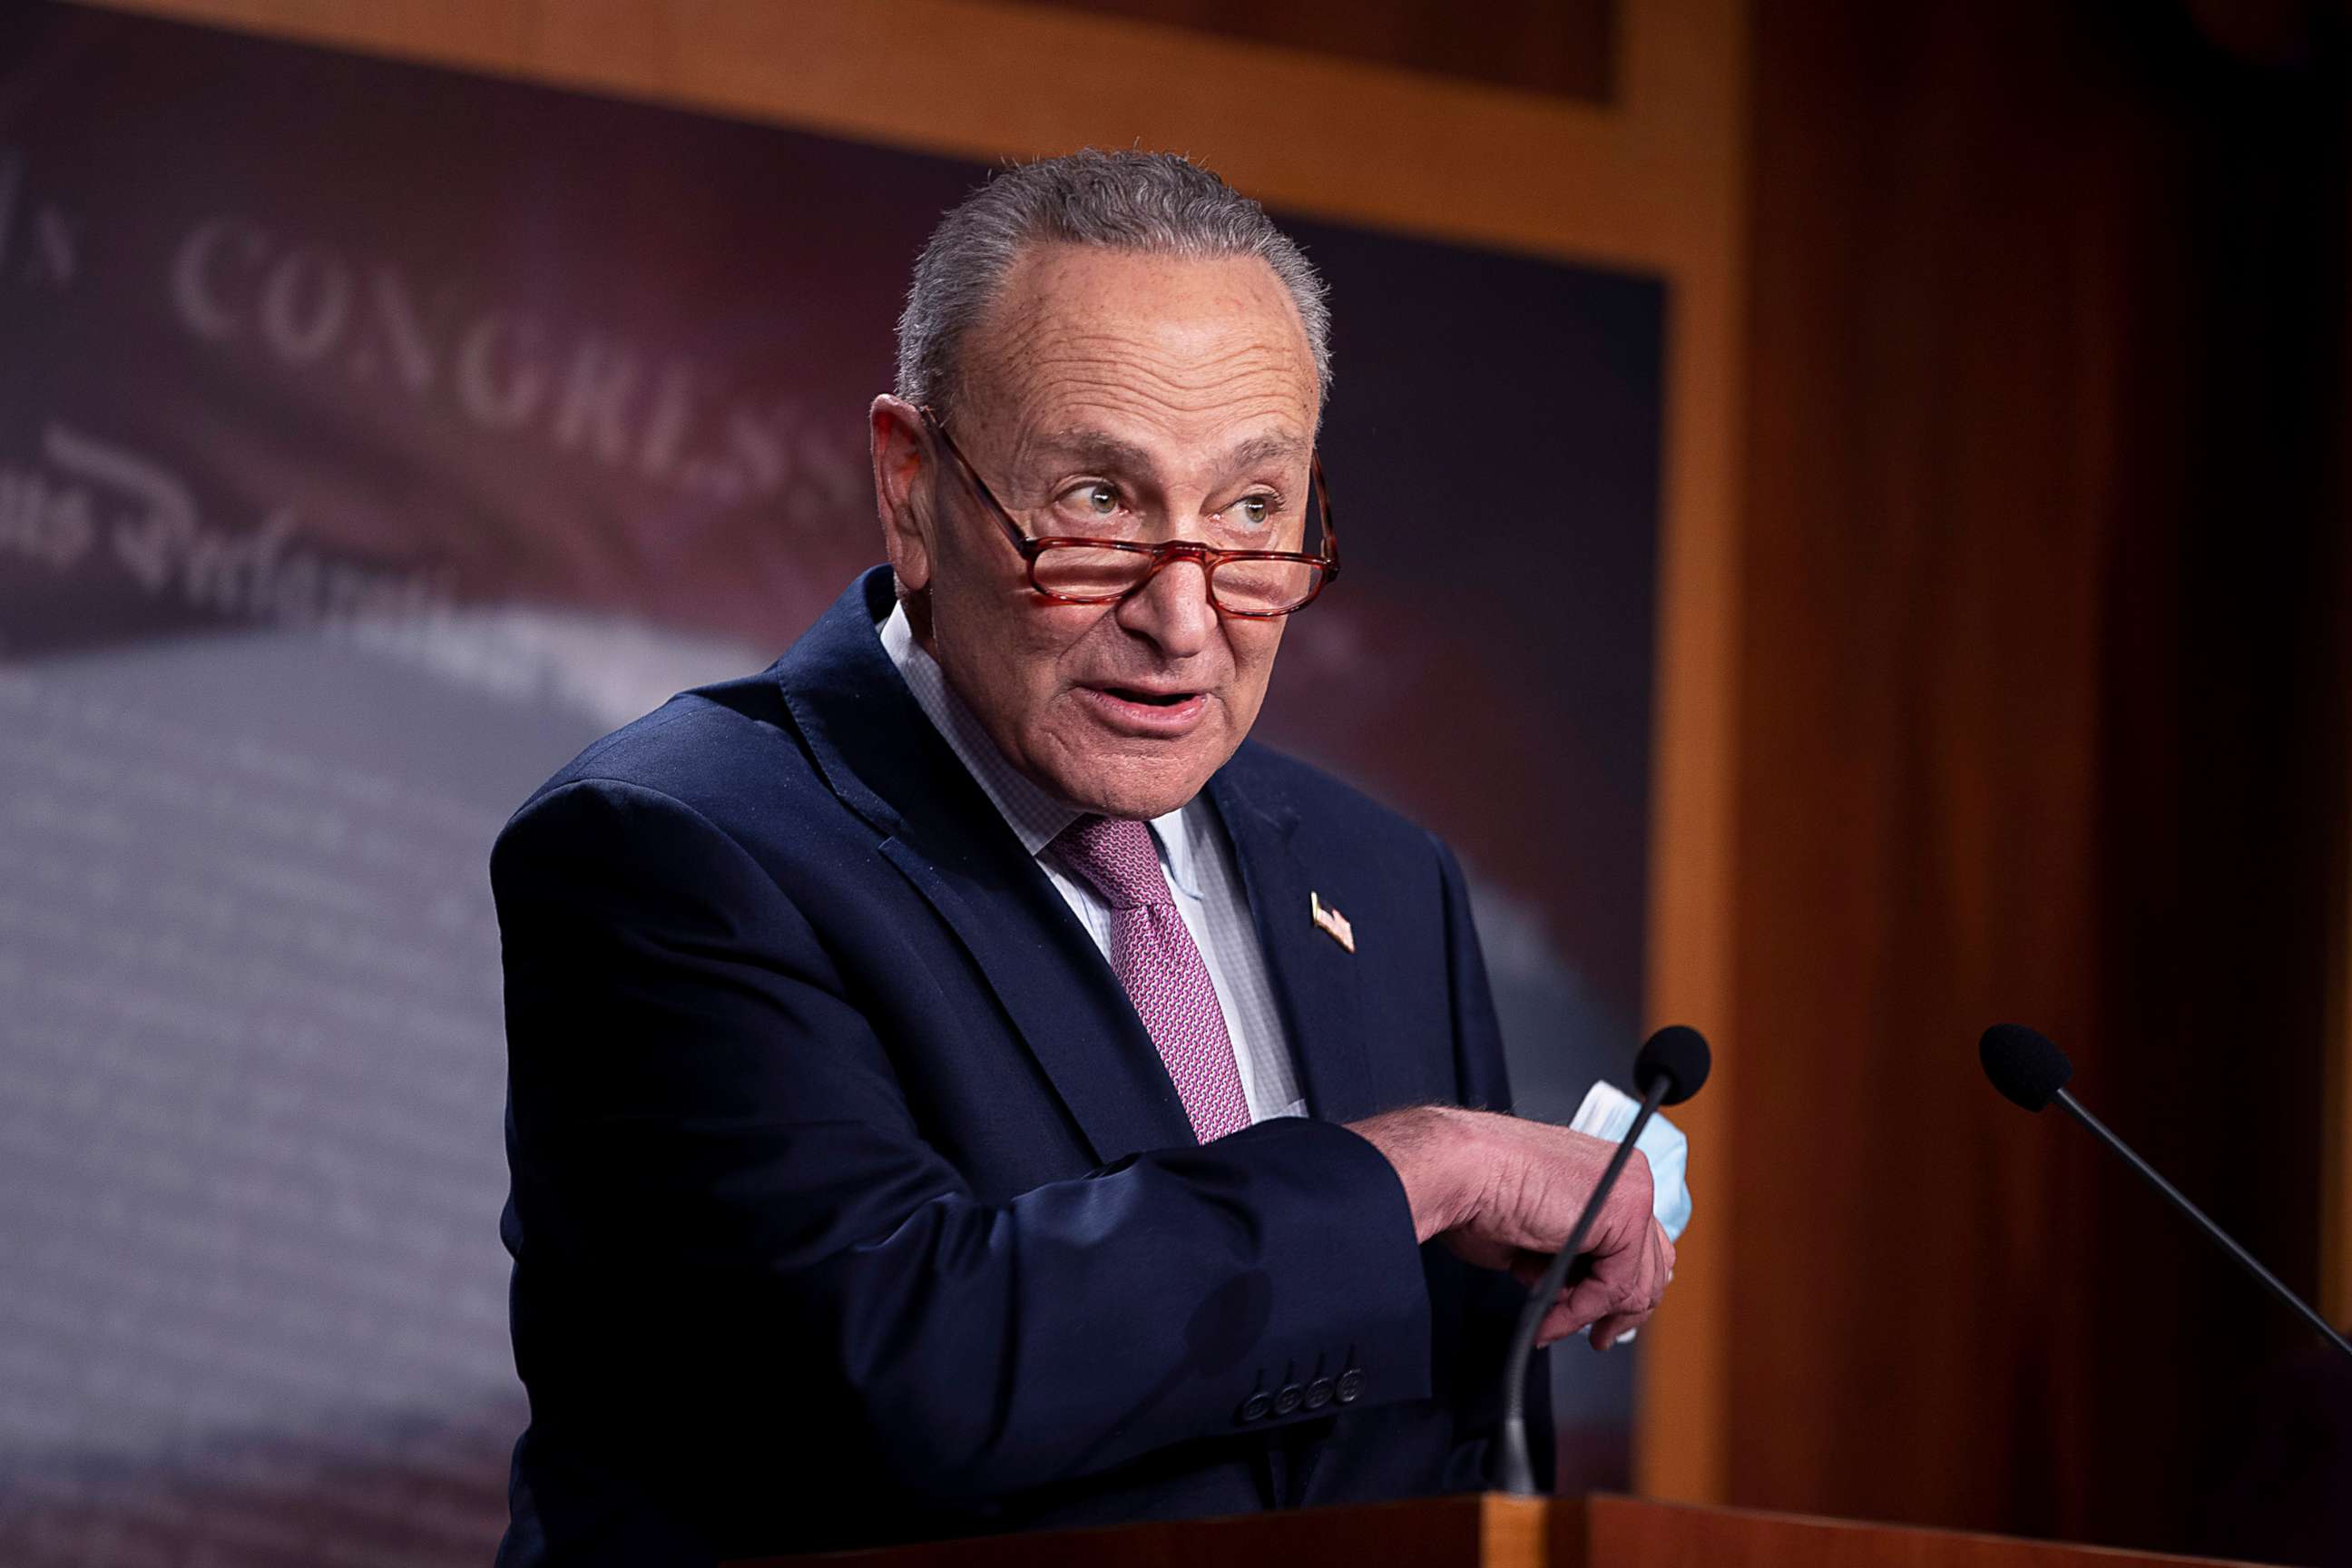 PHOTO: Senate Minority Leader Charles Schumer holds a news conference at the U.S. Capitol, Dec. 1, 2020, in Washington, D.C.